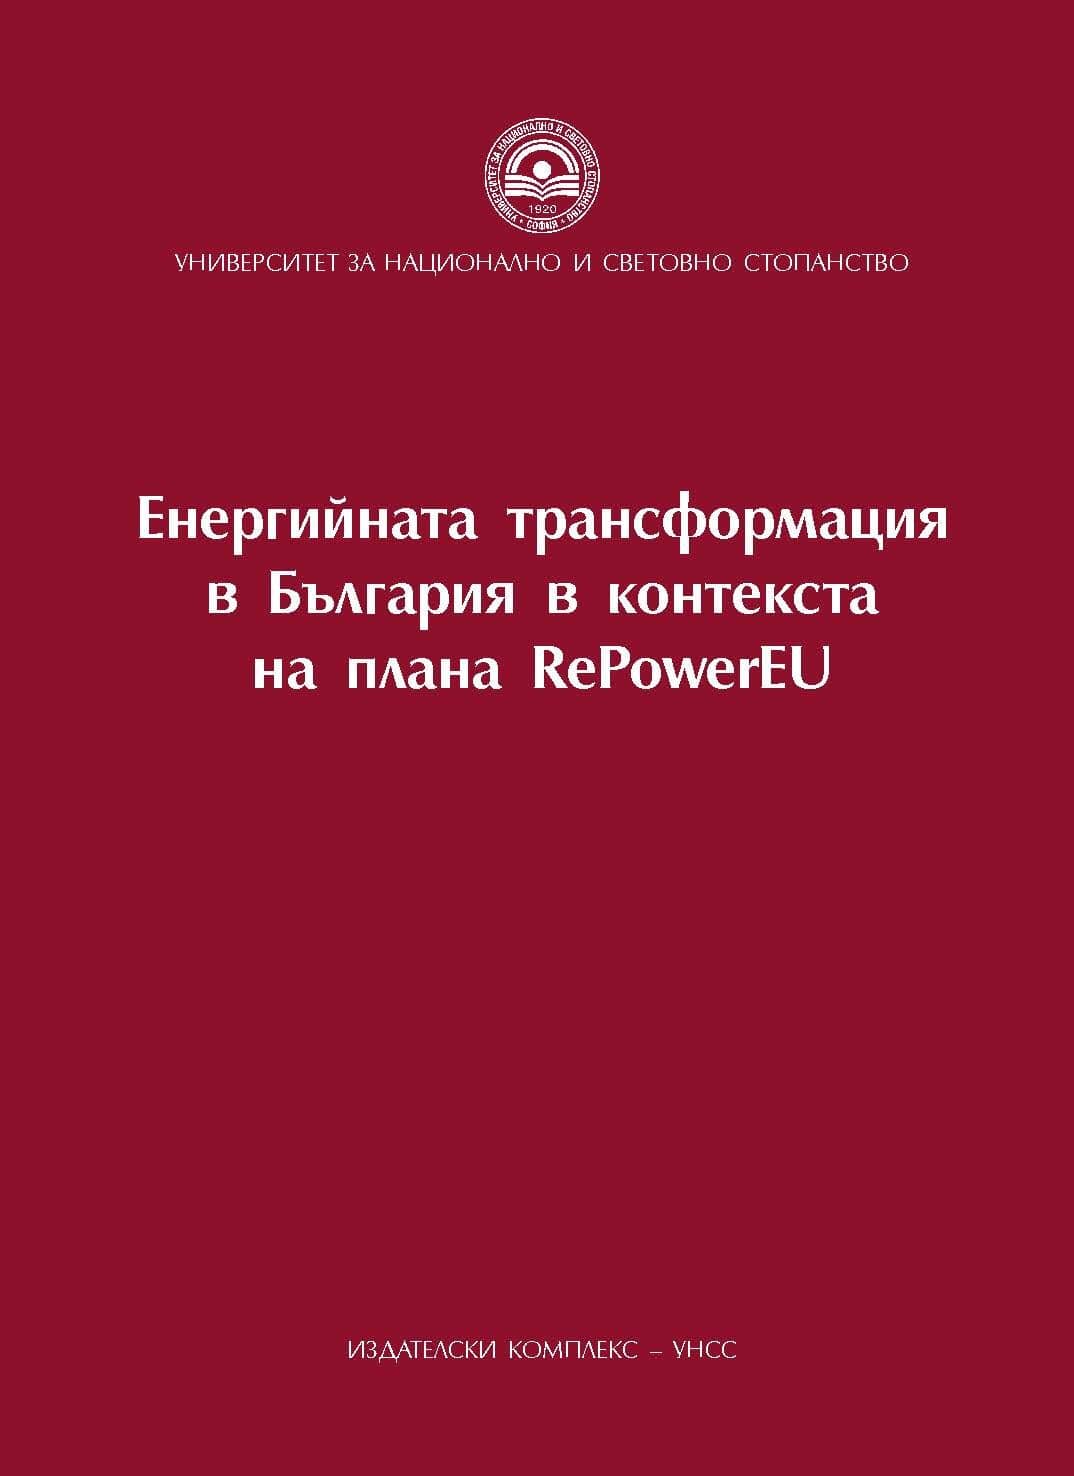 The energy transformation in Bulgaria in the context of REPowerEU plan